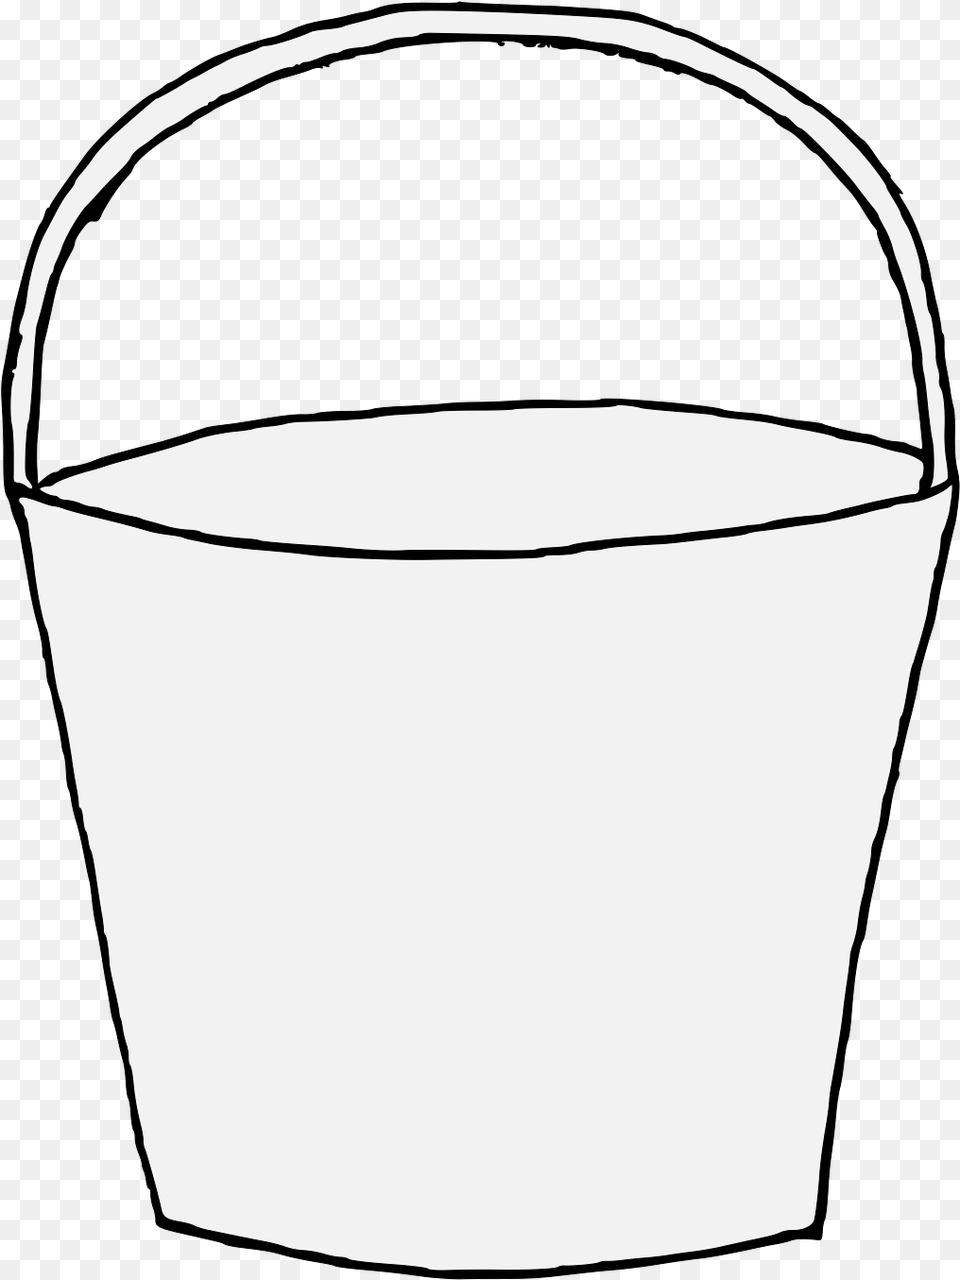 Bucket With Handle Cattle, Clothing, Hardhat, Helmet Png Image